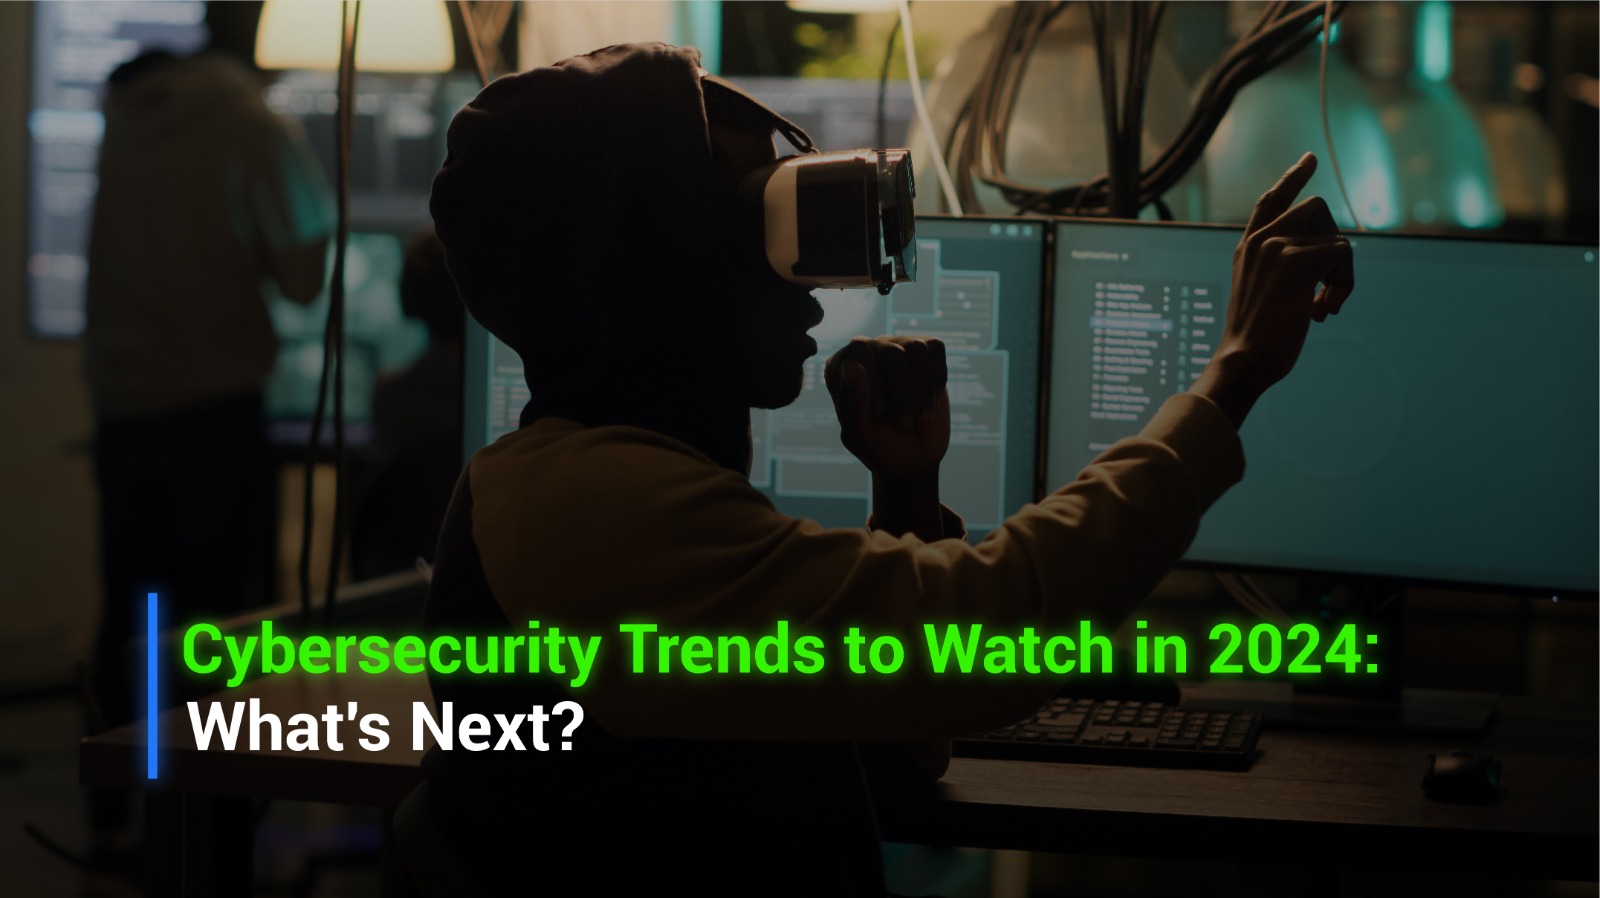 Cybersecurity Trends to Watch in 2024: What’s Next?